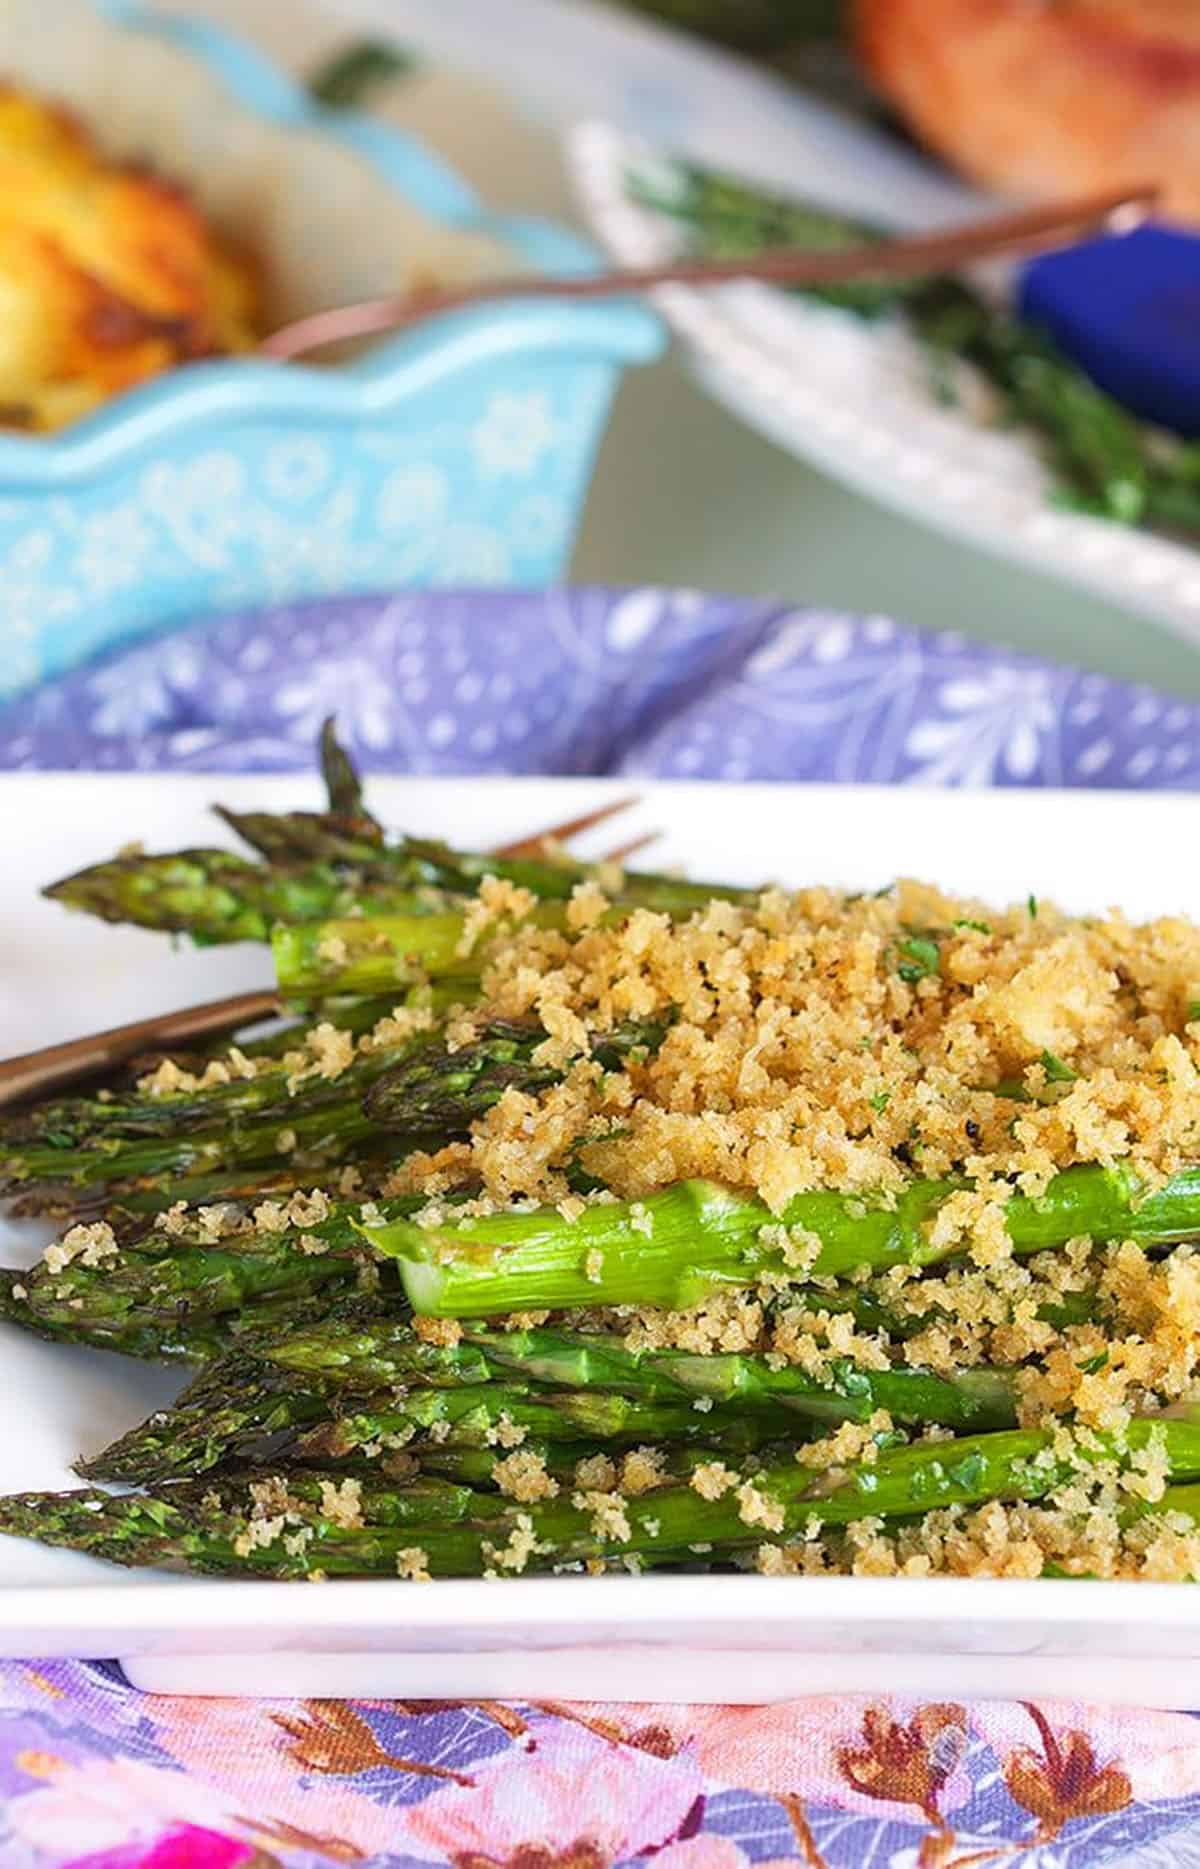 Baked asparagus with panko crust on a white platter.